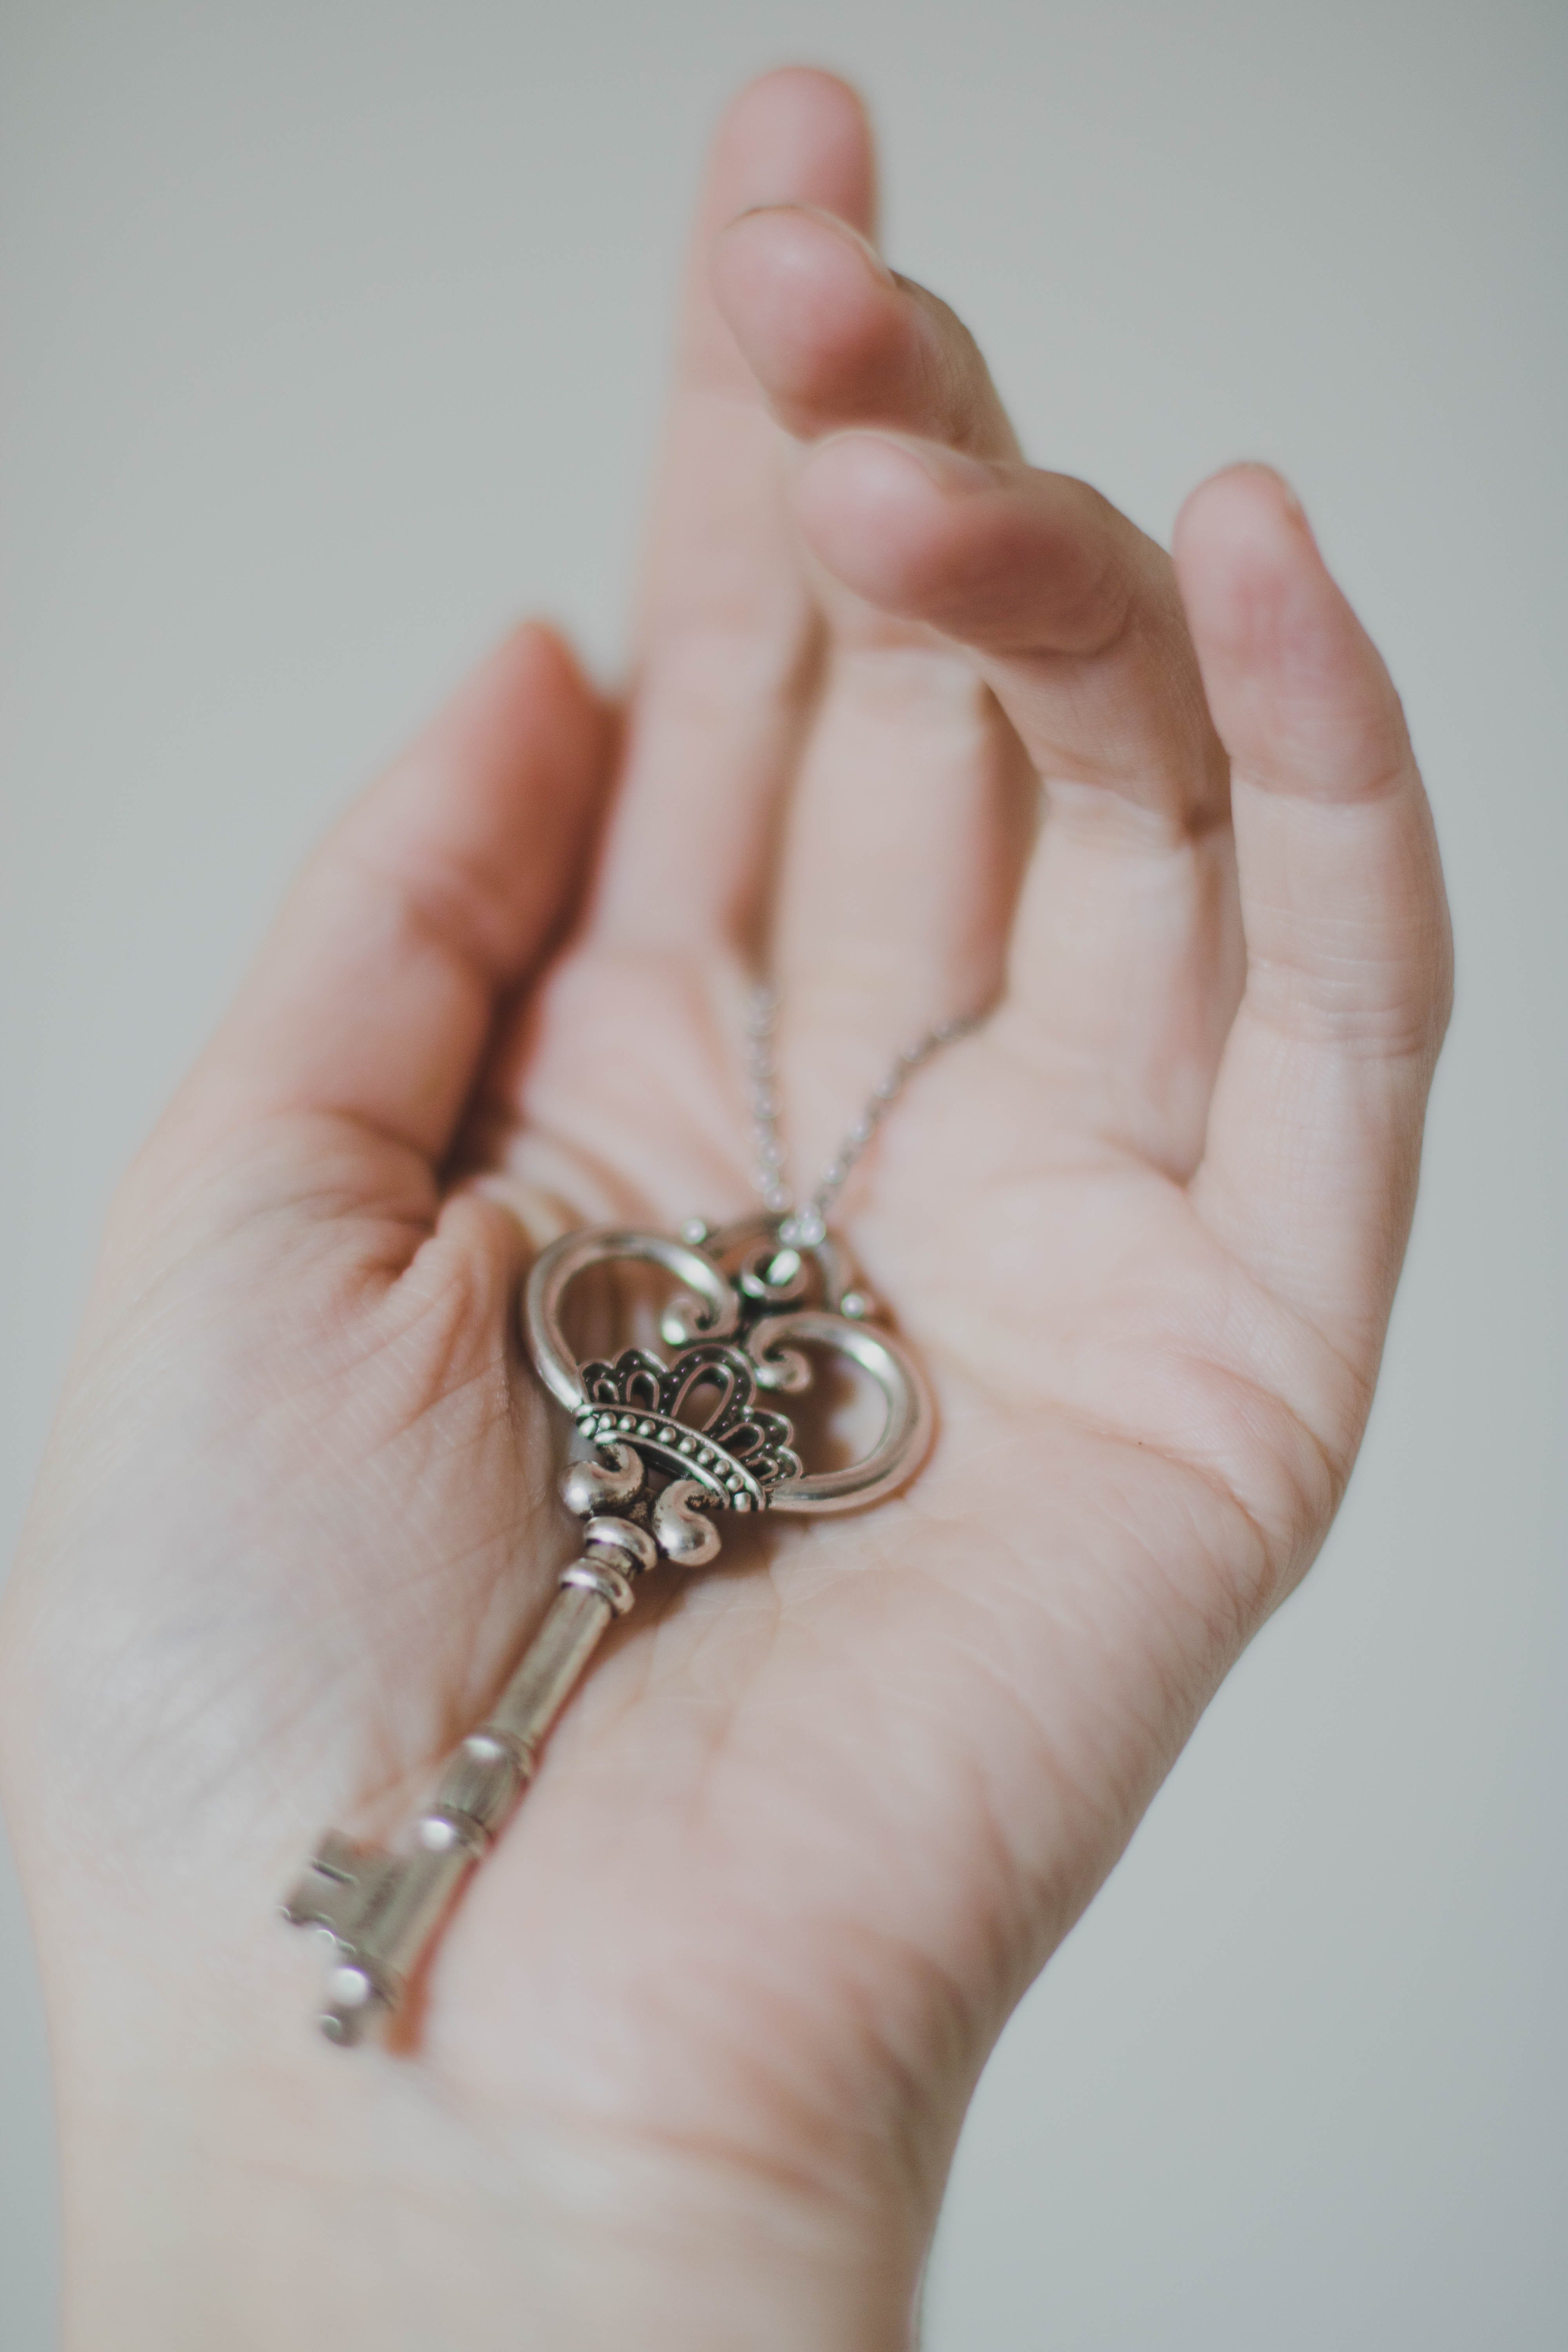 Mia found a small key stuck to the note her grandmother gave. | Source: Pexels